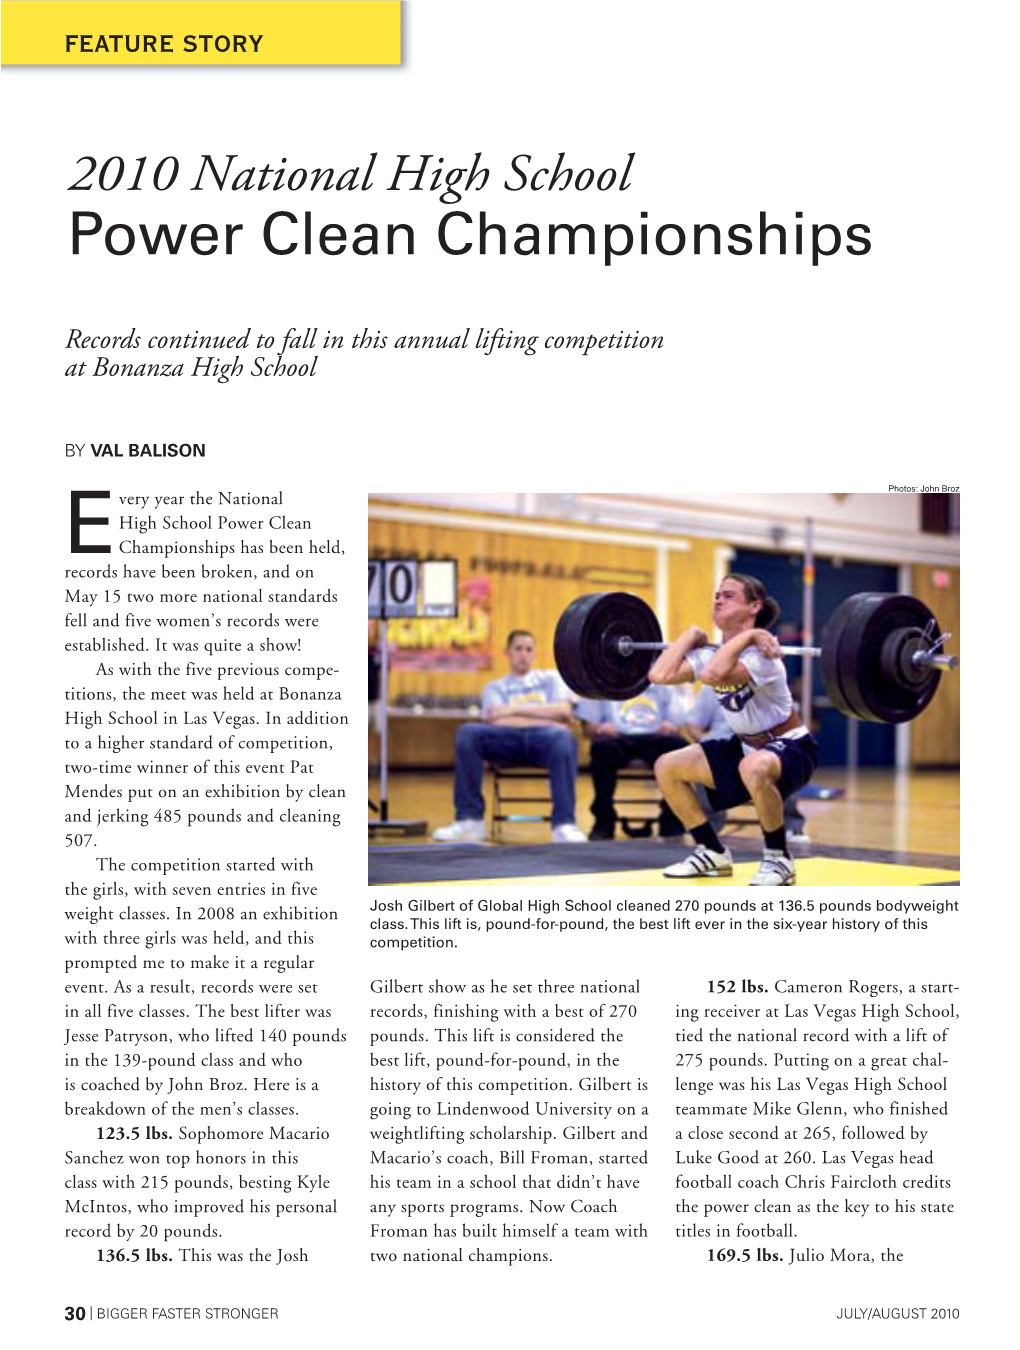 Power Clean Championships